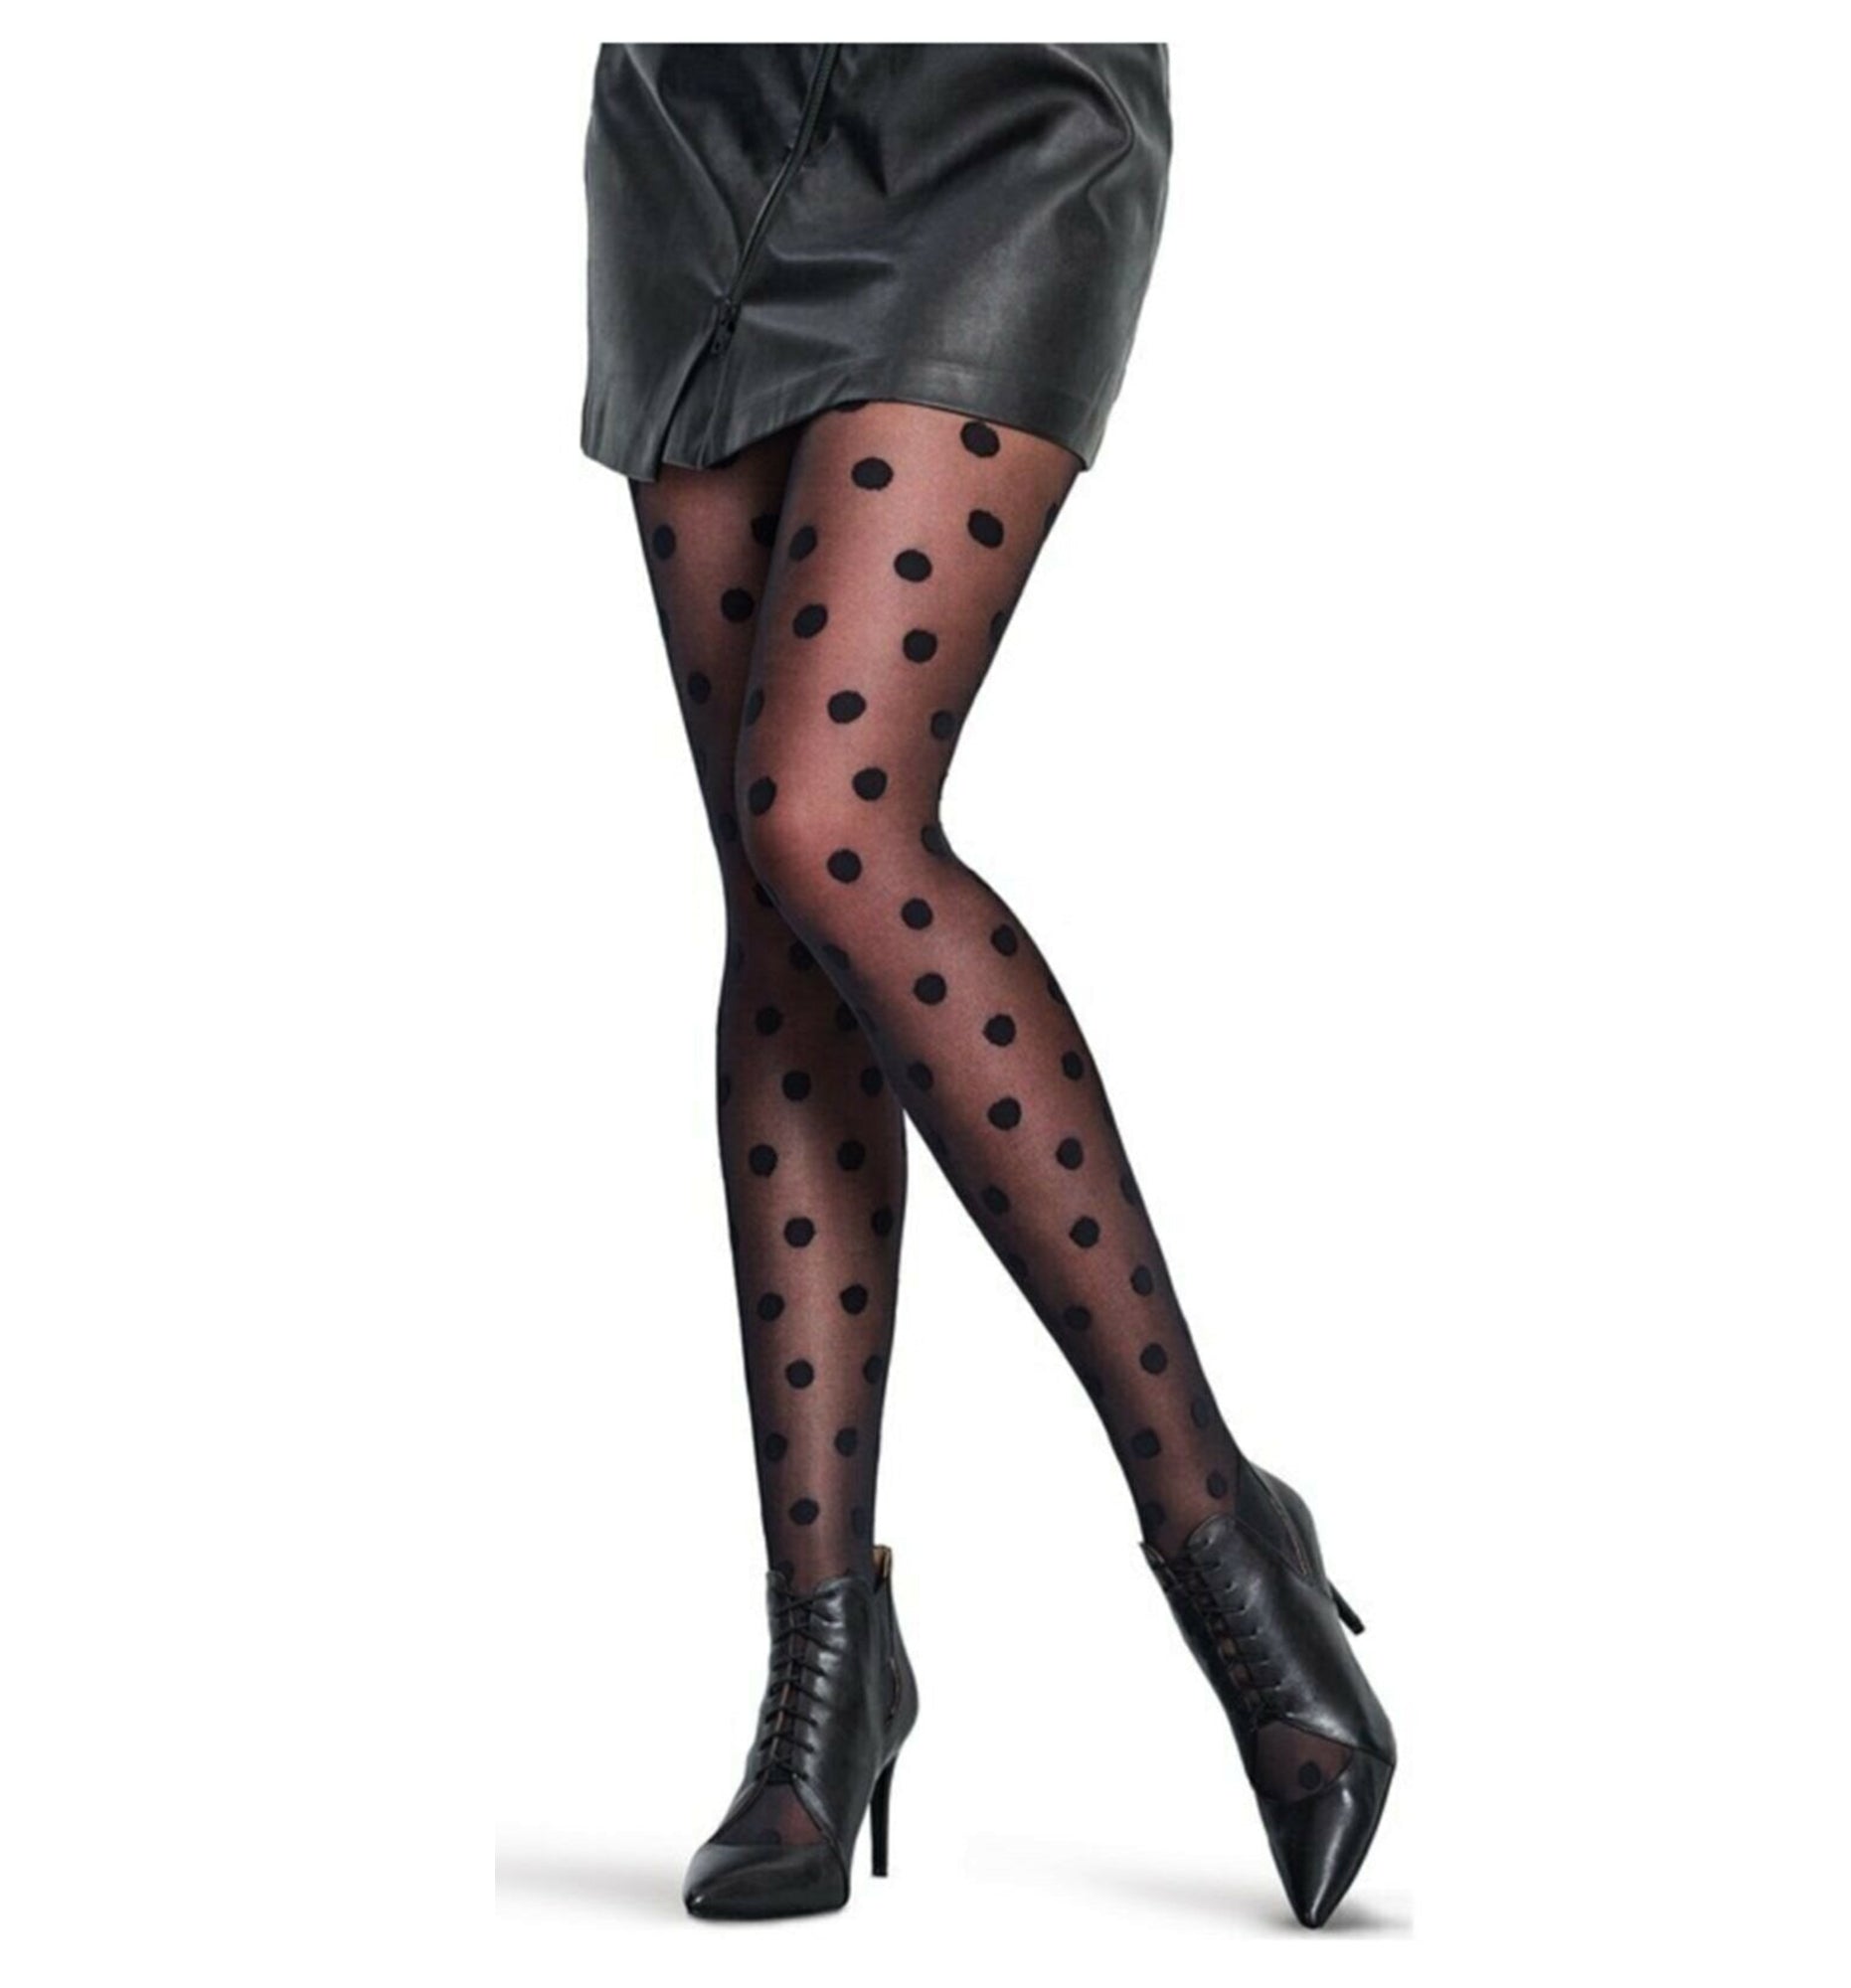 Premium Tight and Hosiery For Women From Fashion Tight